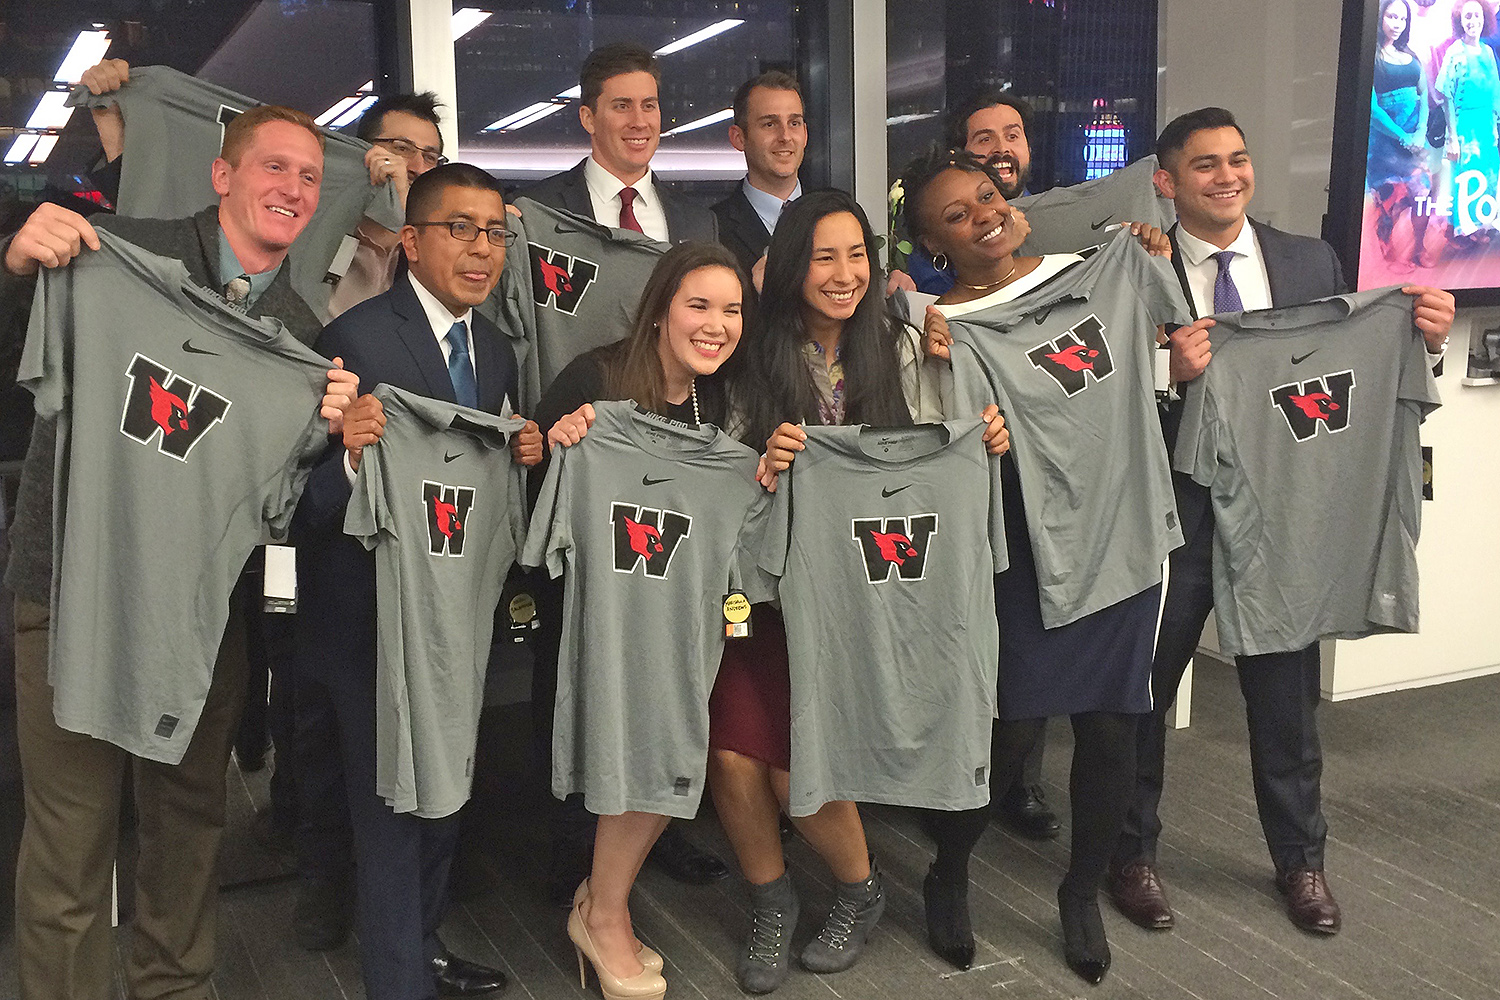 Wesleyan's newest group of Posse Veteran Scholars. Back row, from left: Gregory Hardy, Andrew Daggon, Zachary Patterson, Daniel Rodriguez. Front row, from left: Lance Williams, Noel Salvador, Marisella Andrews, Rebecca Martinez, Gabrielle Hurlock, Mitchell Motlagh.